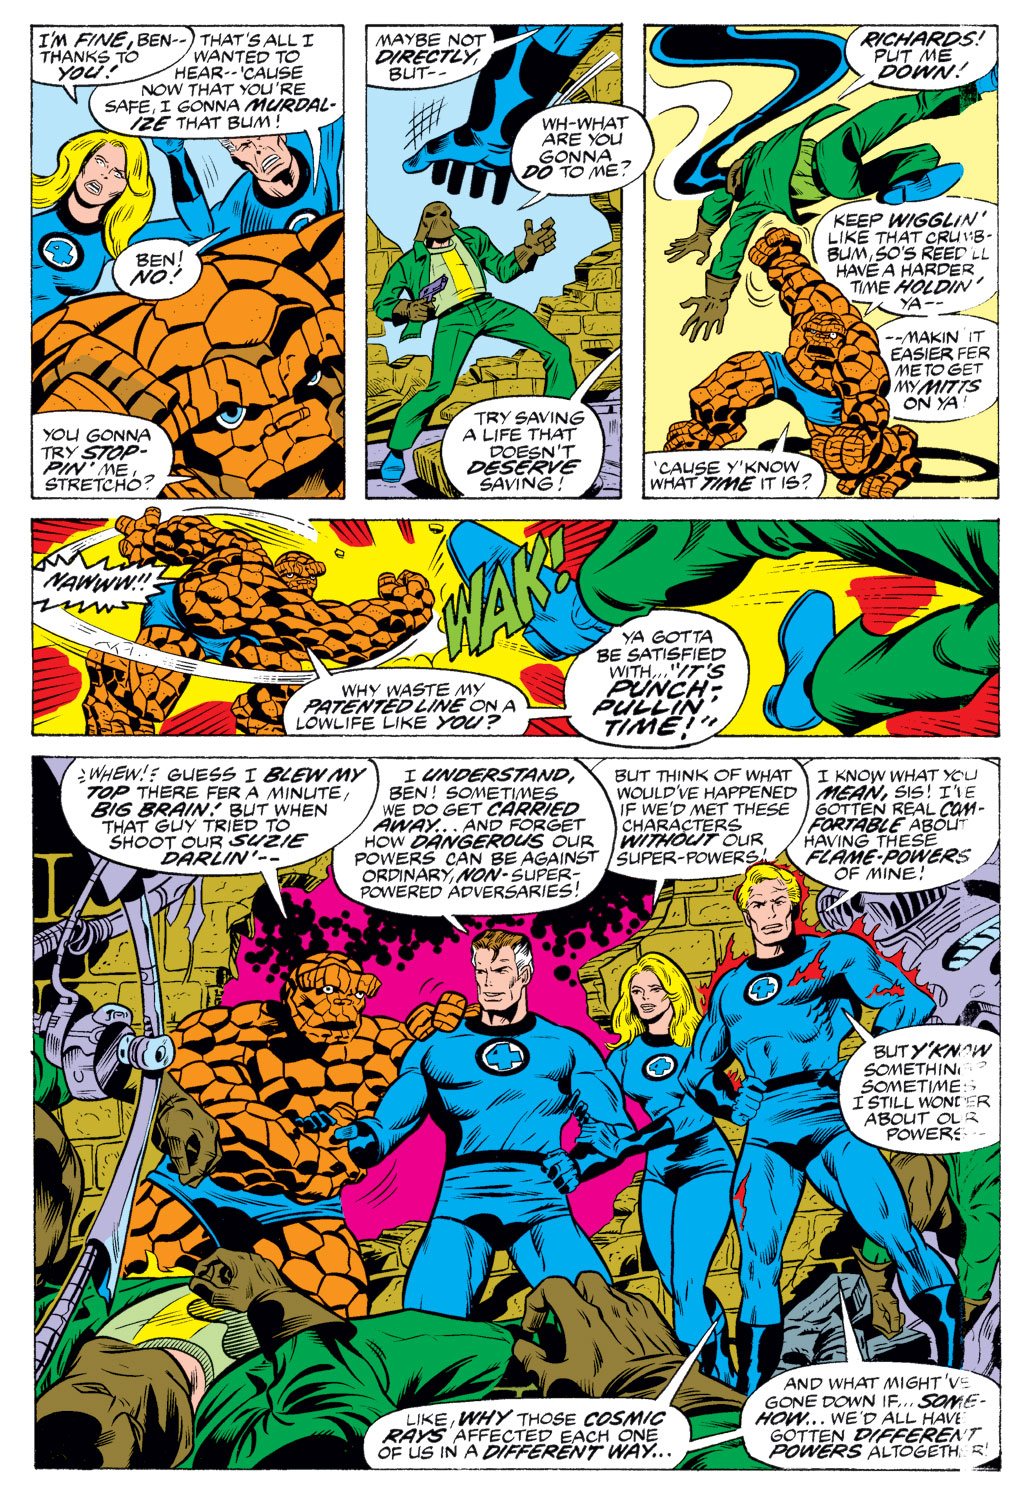 What If? (1977) issue 6 - The Fantastic Four had different superpowers - Page 5